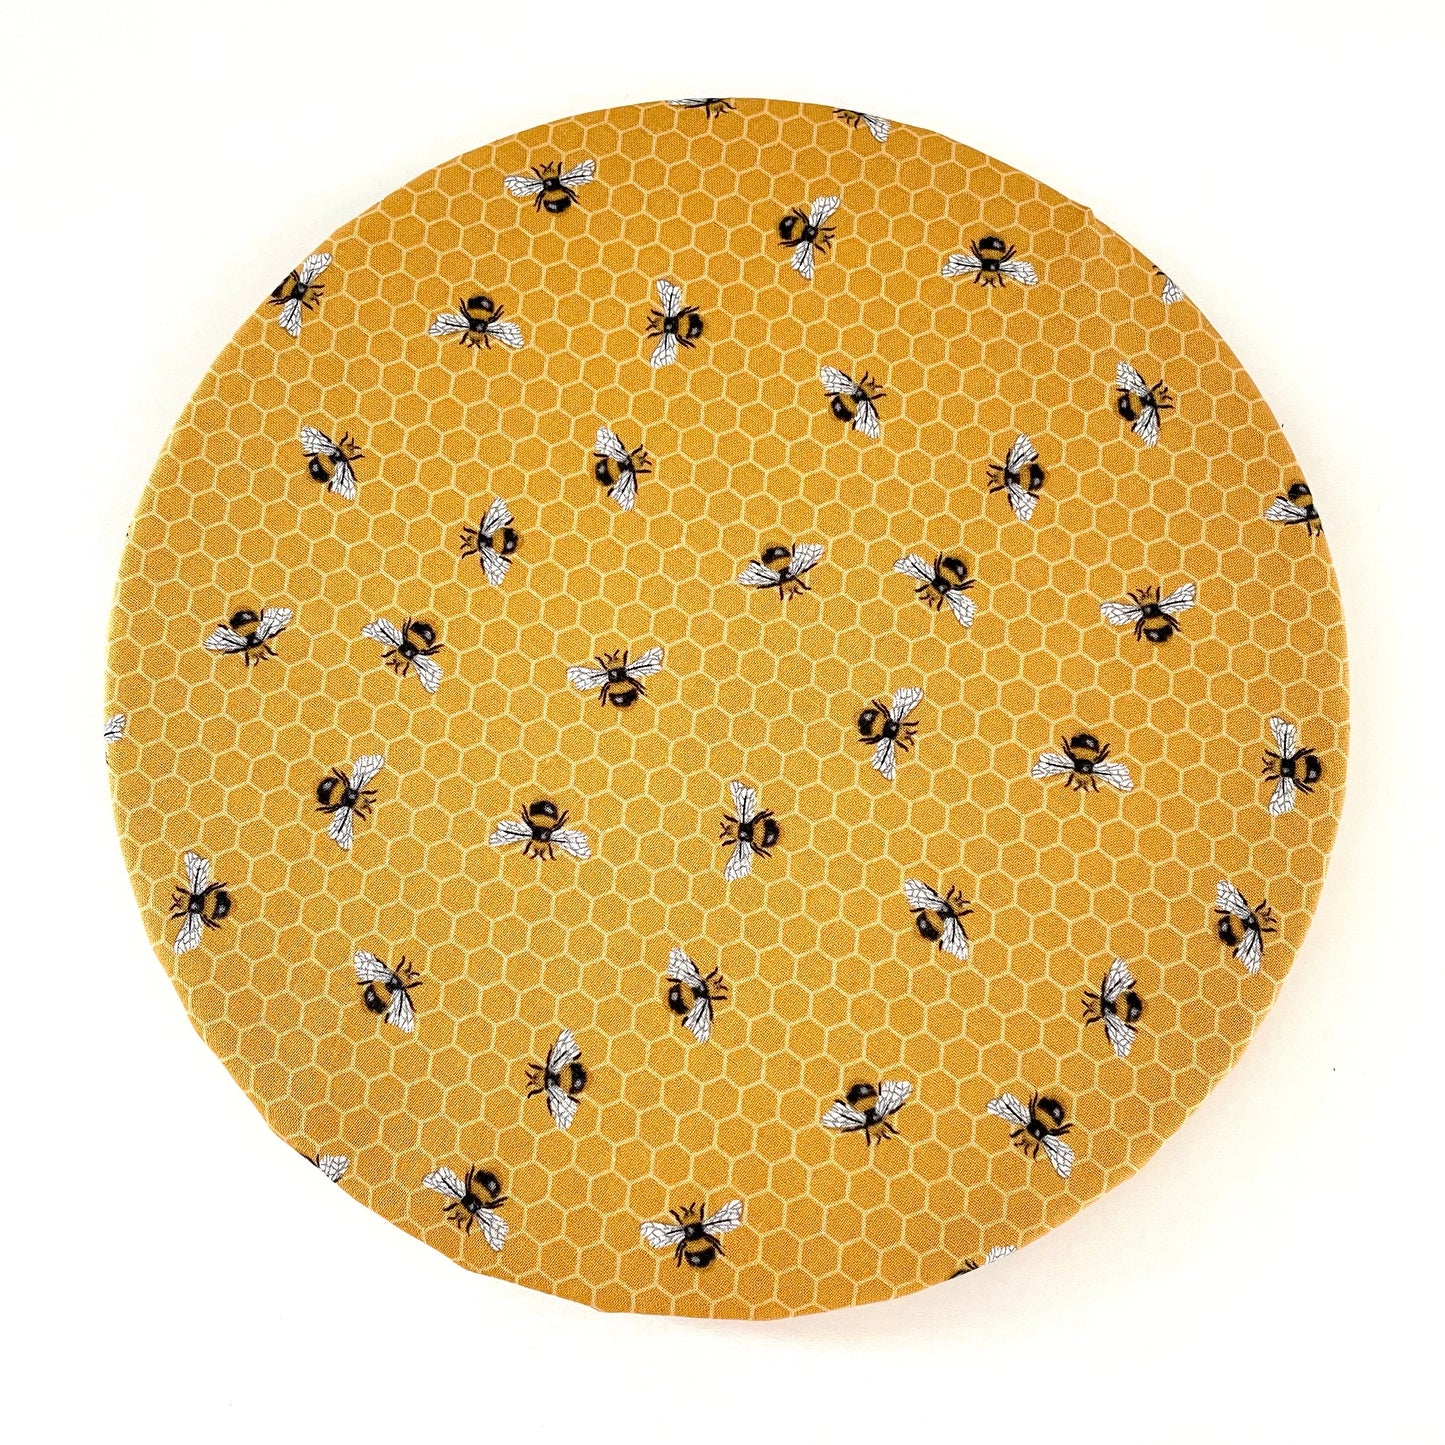 Stand Mixer Bowl Covers - Bees and Honeycombs